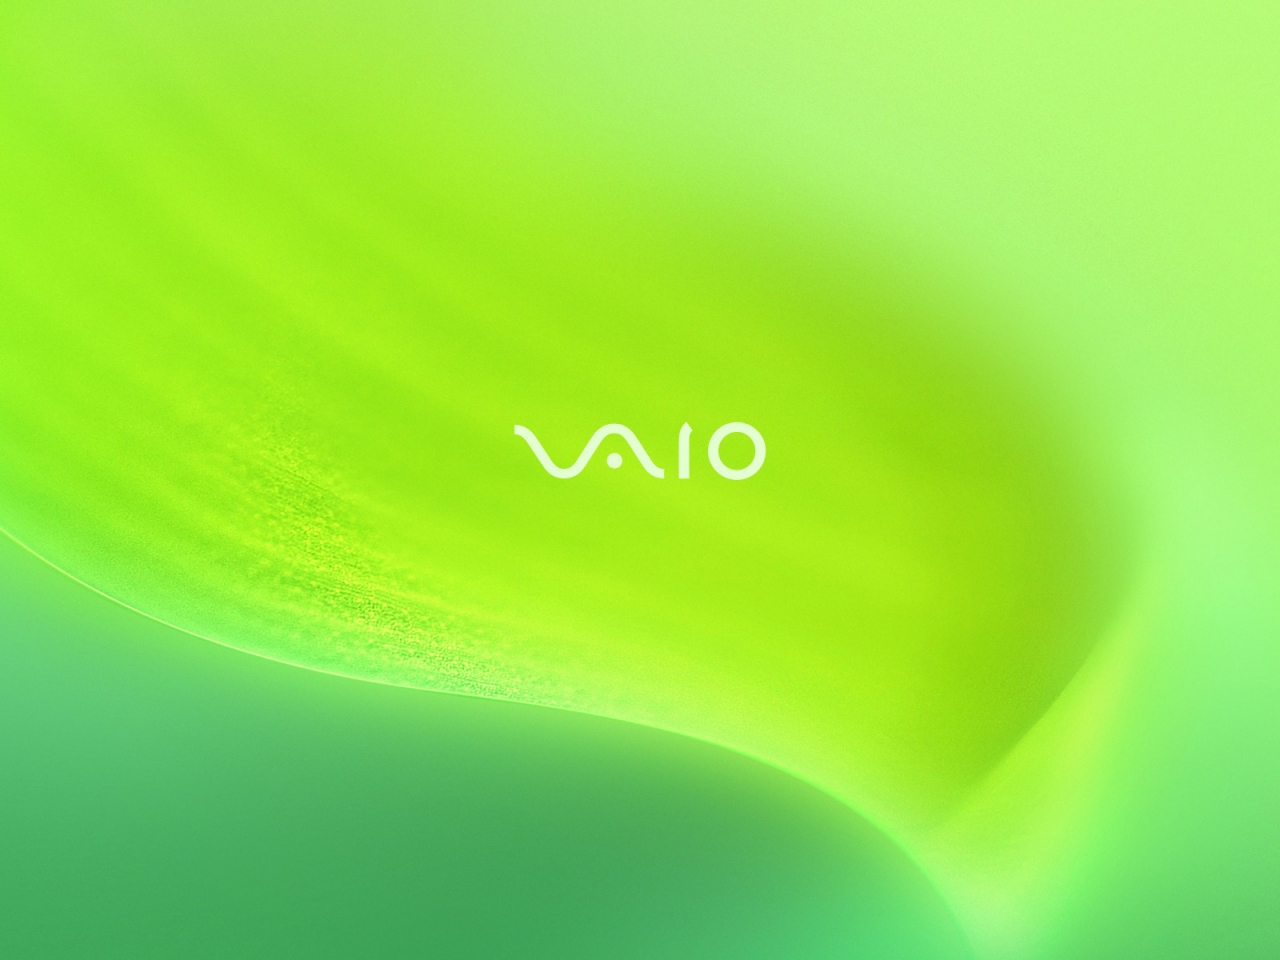 Vaio Green Leaf for 1280 x 960 resolution